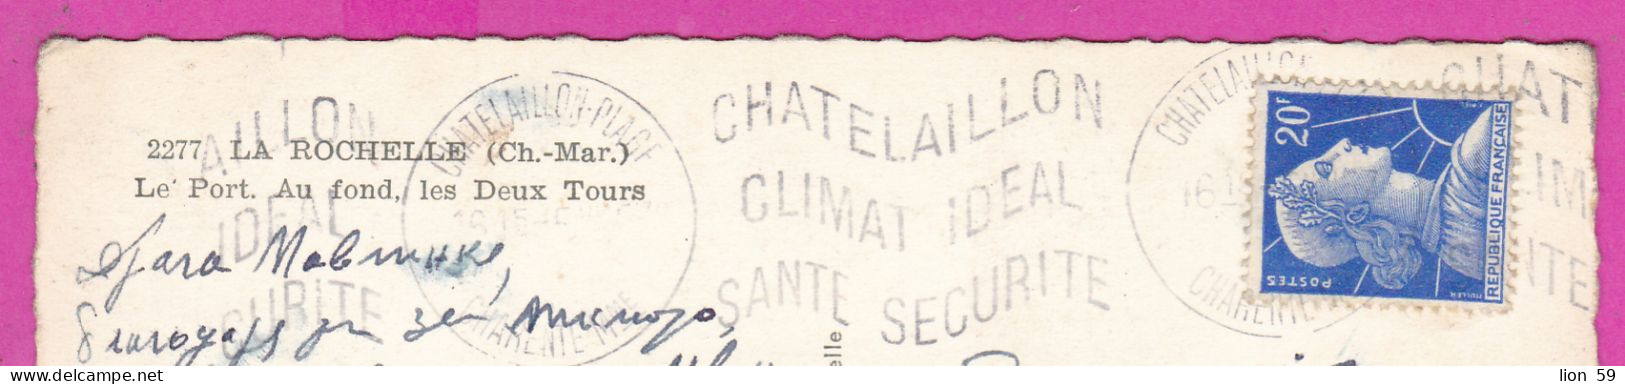 294246 / France - LA ROCHELLE (Ch.-Mer.) Port  PC 1958 Chatelaillon Plage USED  20 Fr. Marianne Of Muller Flamme Chatela - 1955-1961 Marianne Of Muller